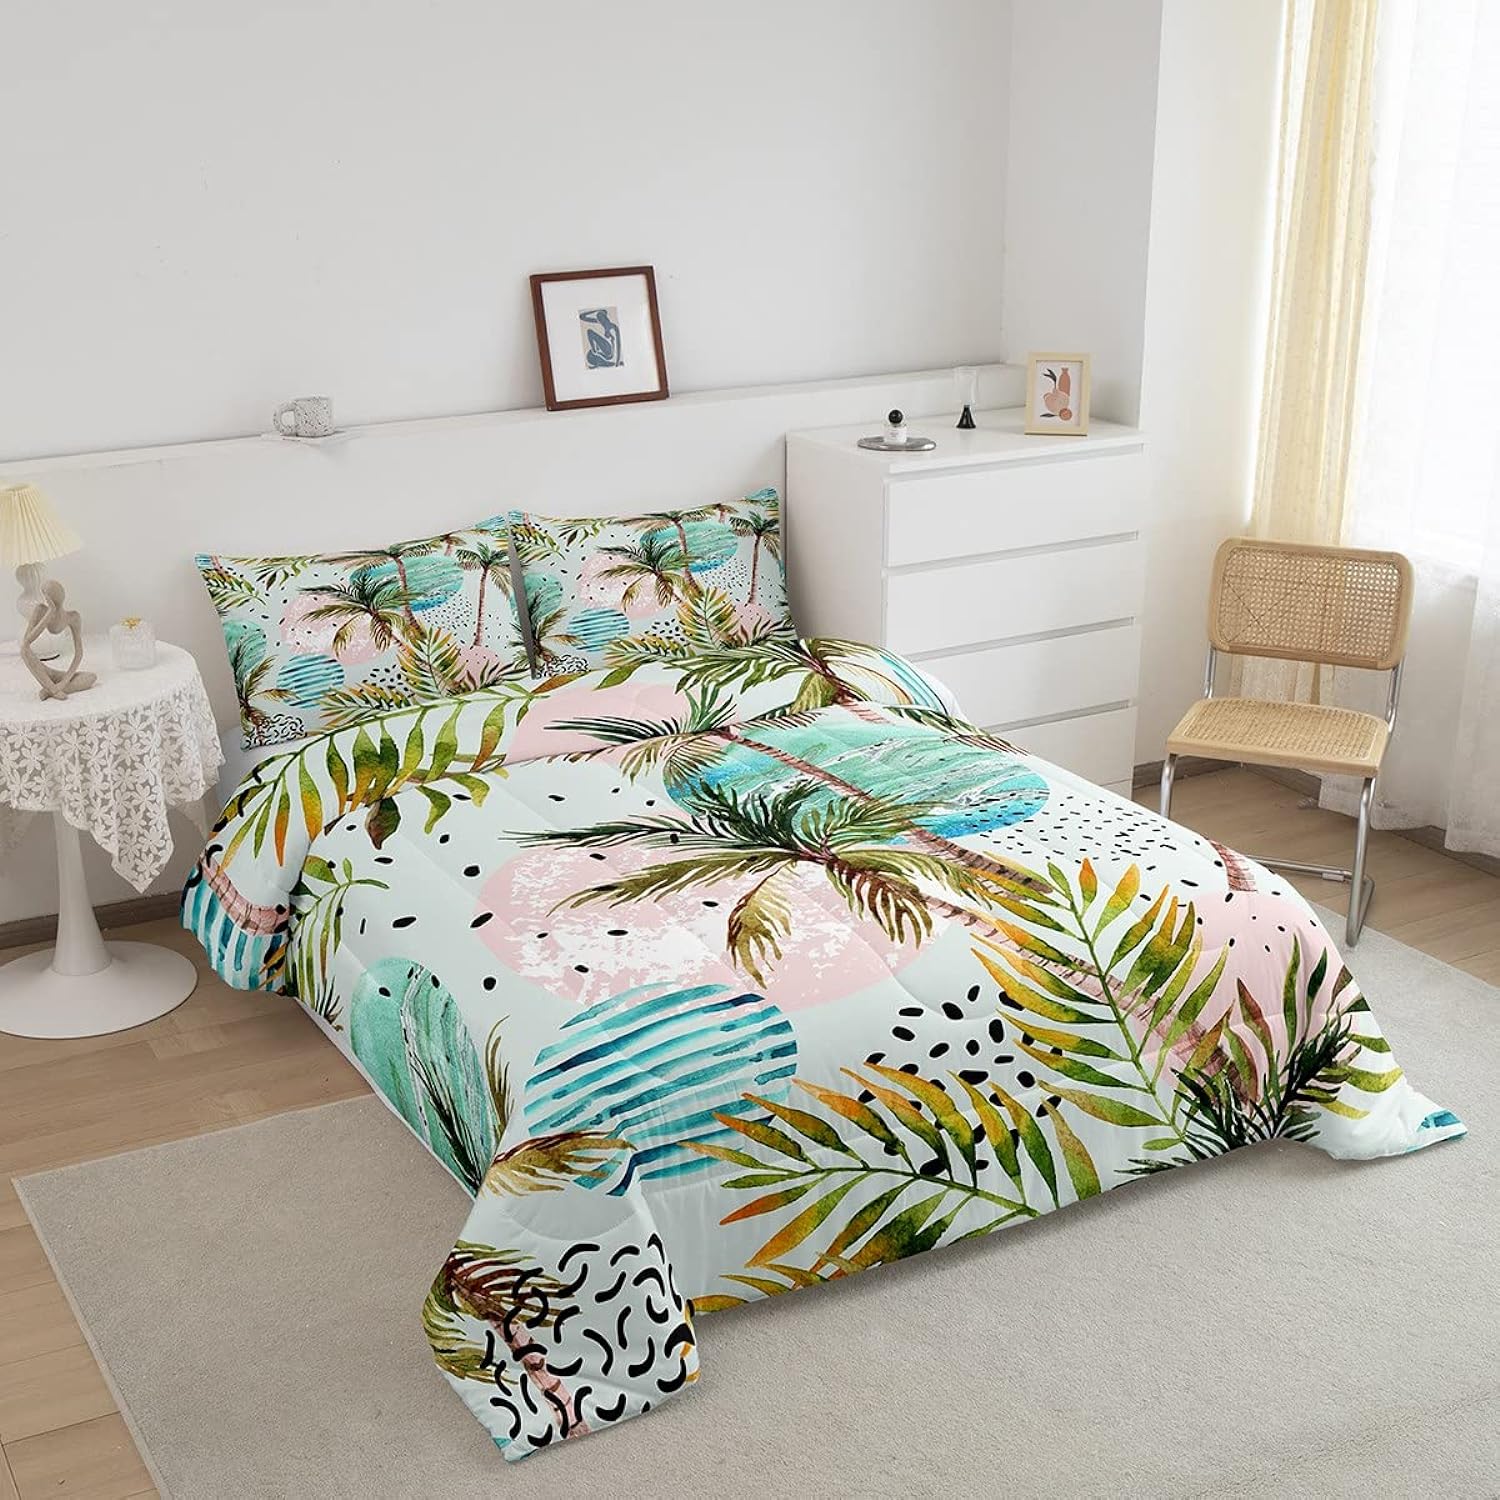 Great Choice Products Tropical Comforter Set Twin Size Palm Tree Bedding Set 2Pcs For Kids Boys Teens Ocean Beach Theme Duvet Insert Watercolor Qui…